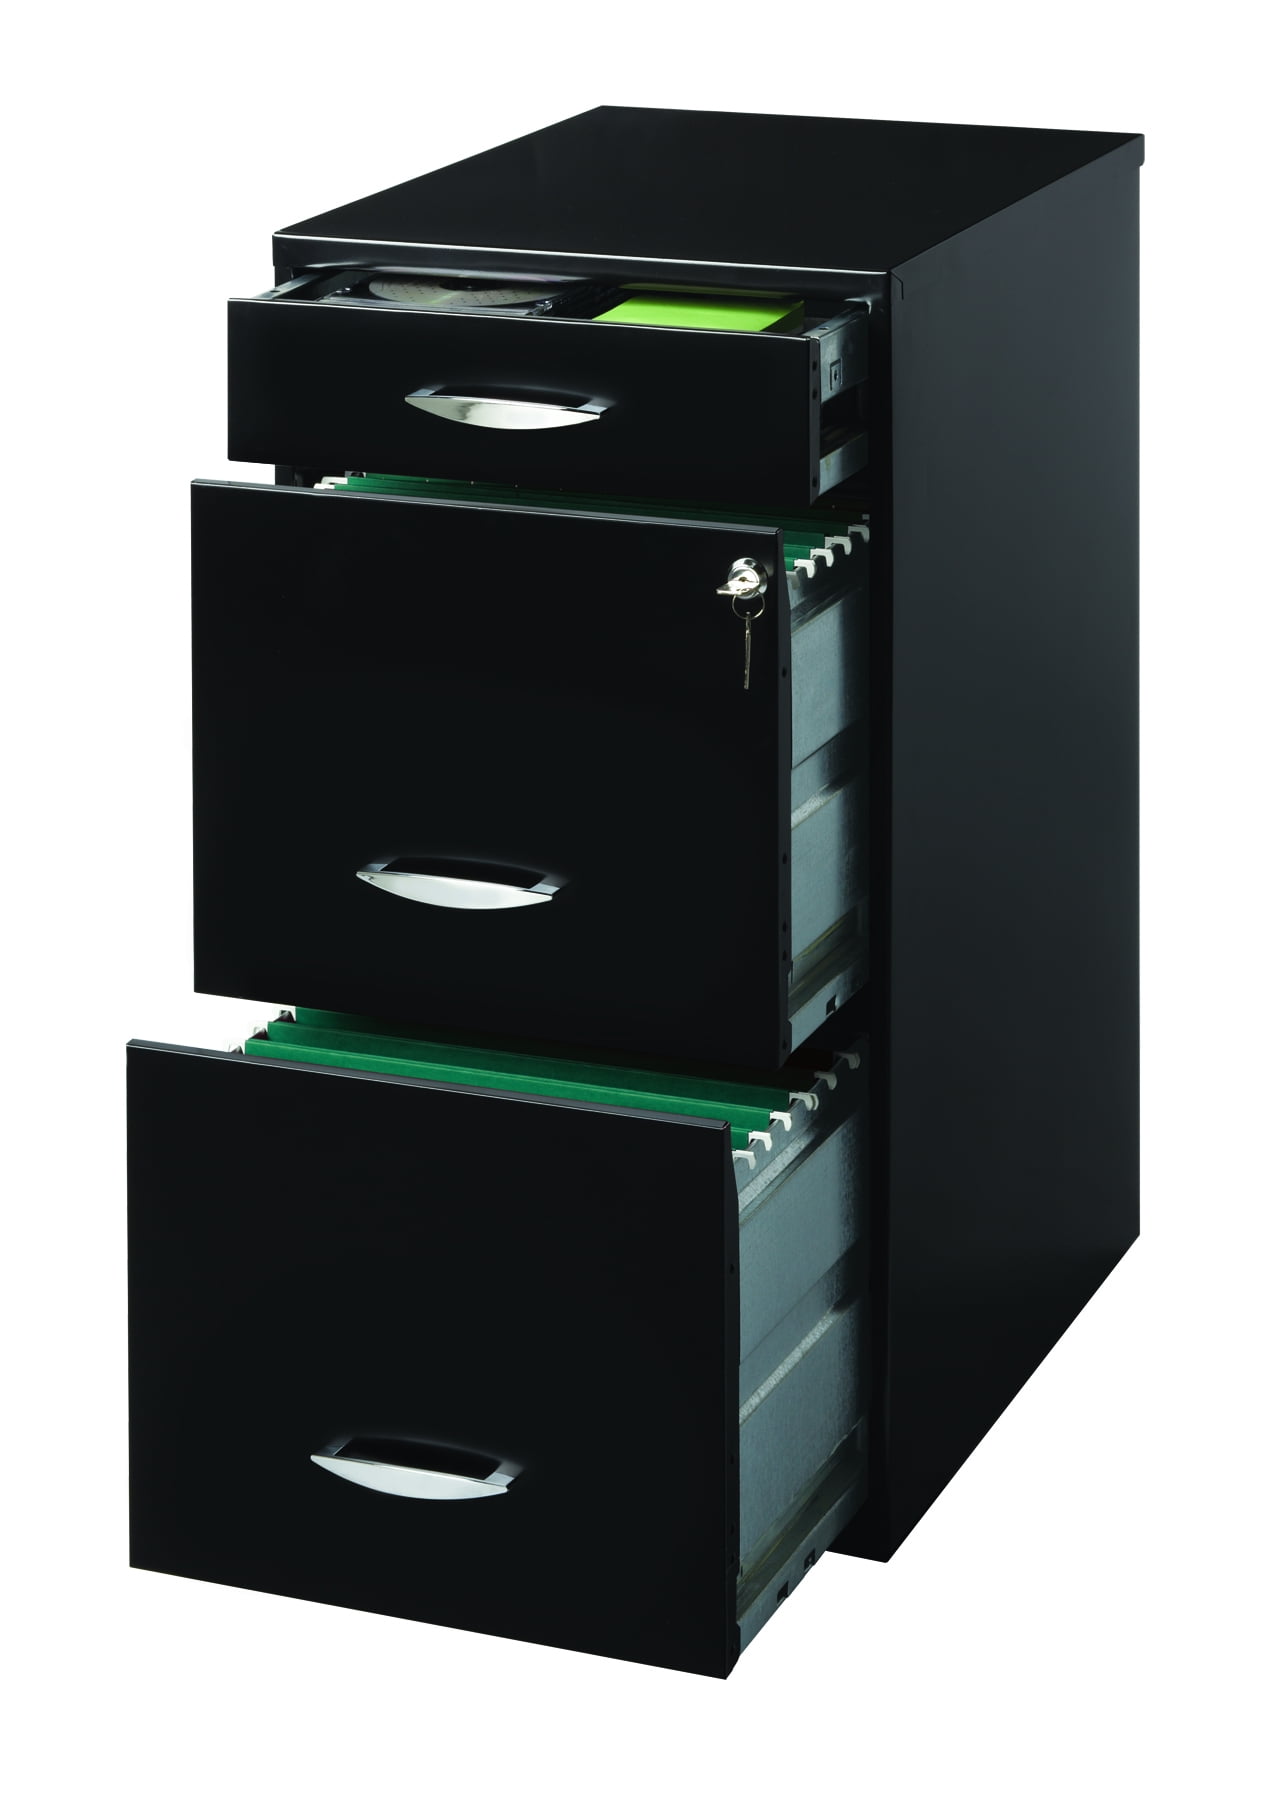 Filing Cabinet 3 Drawer With Pencil Tray And Lock Black Walmart